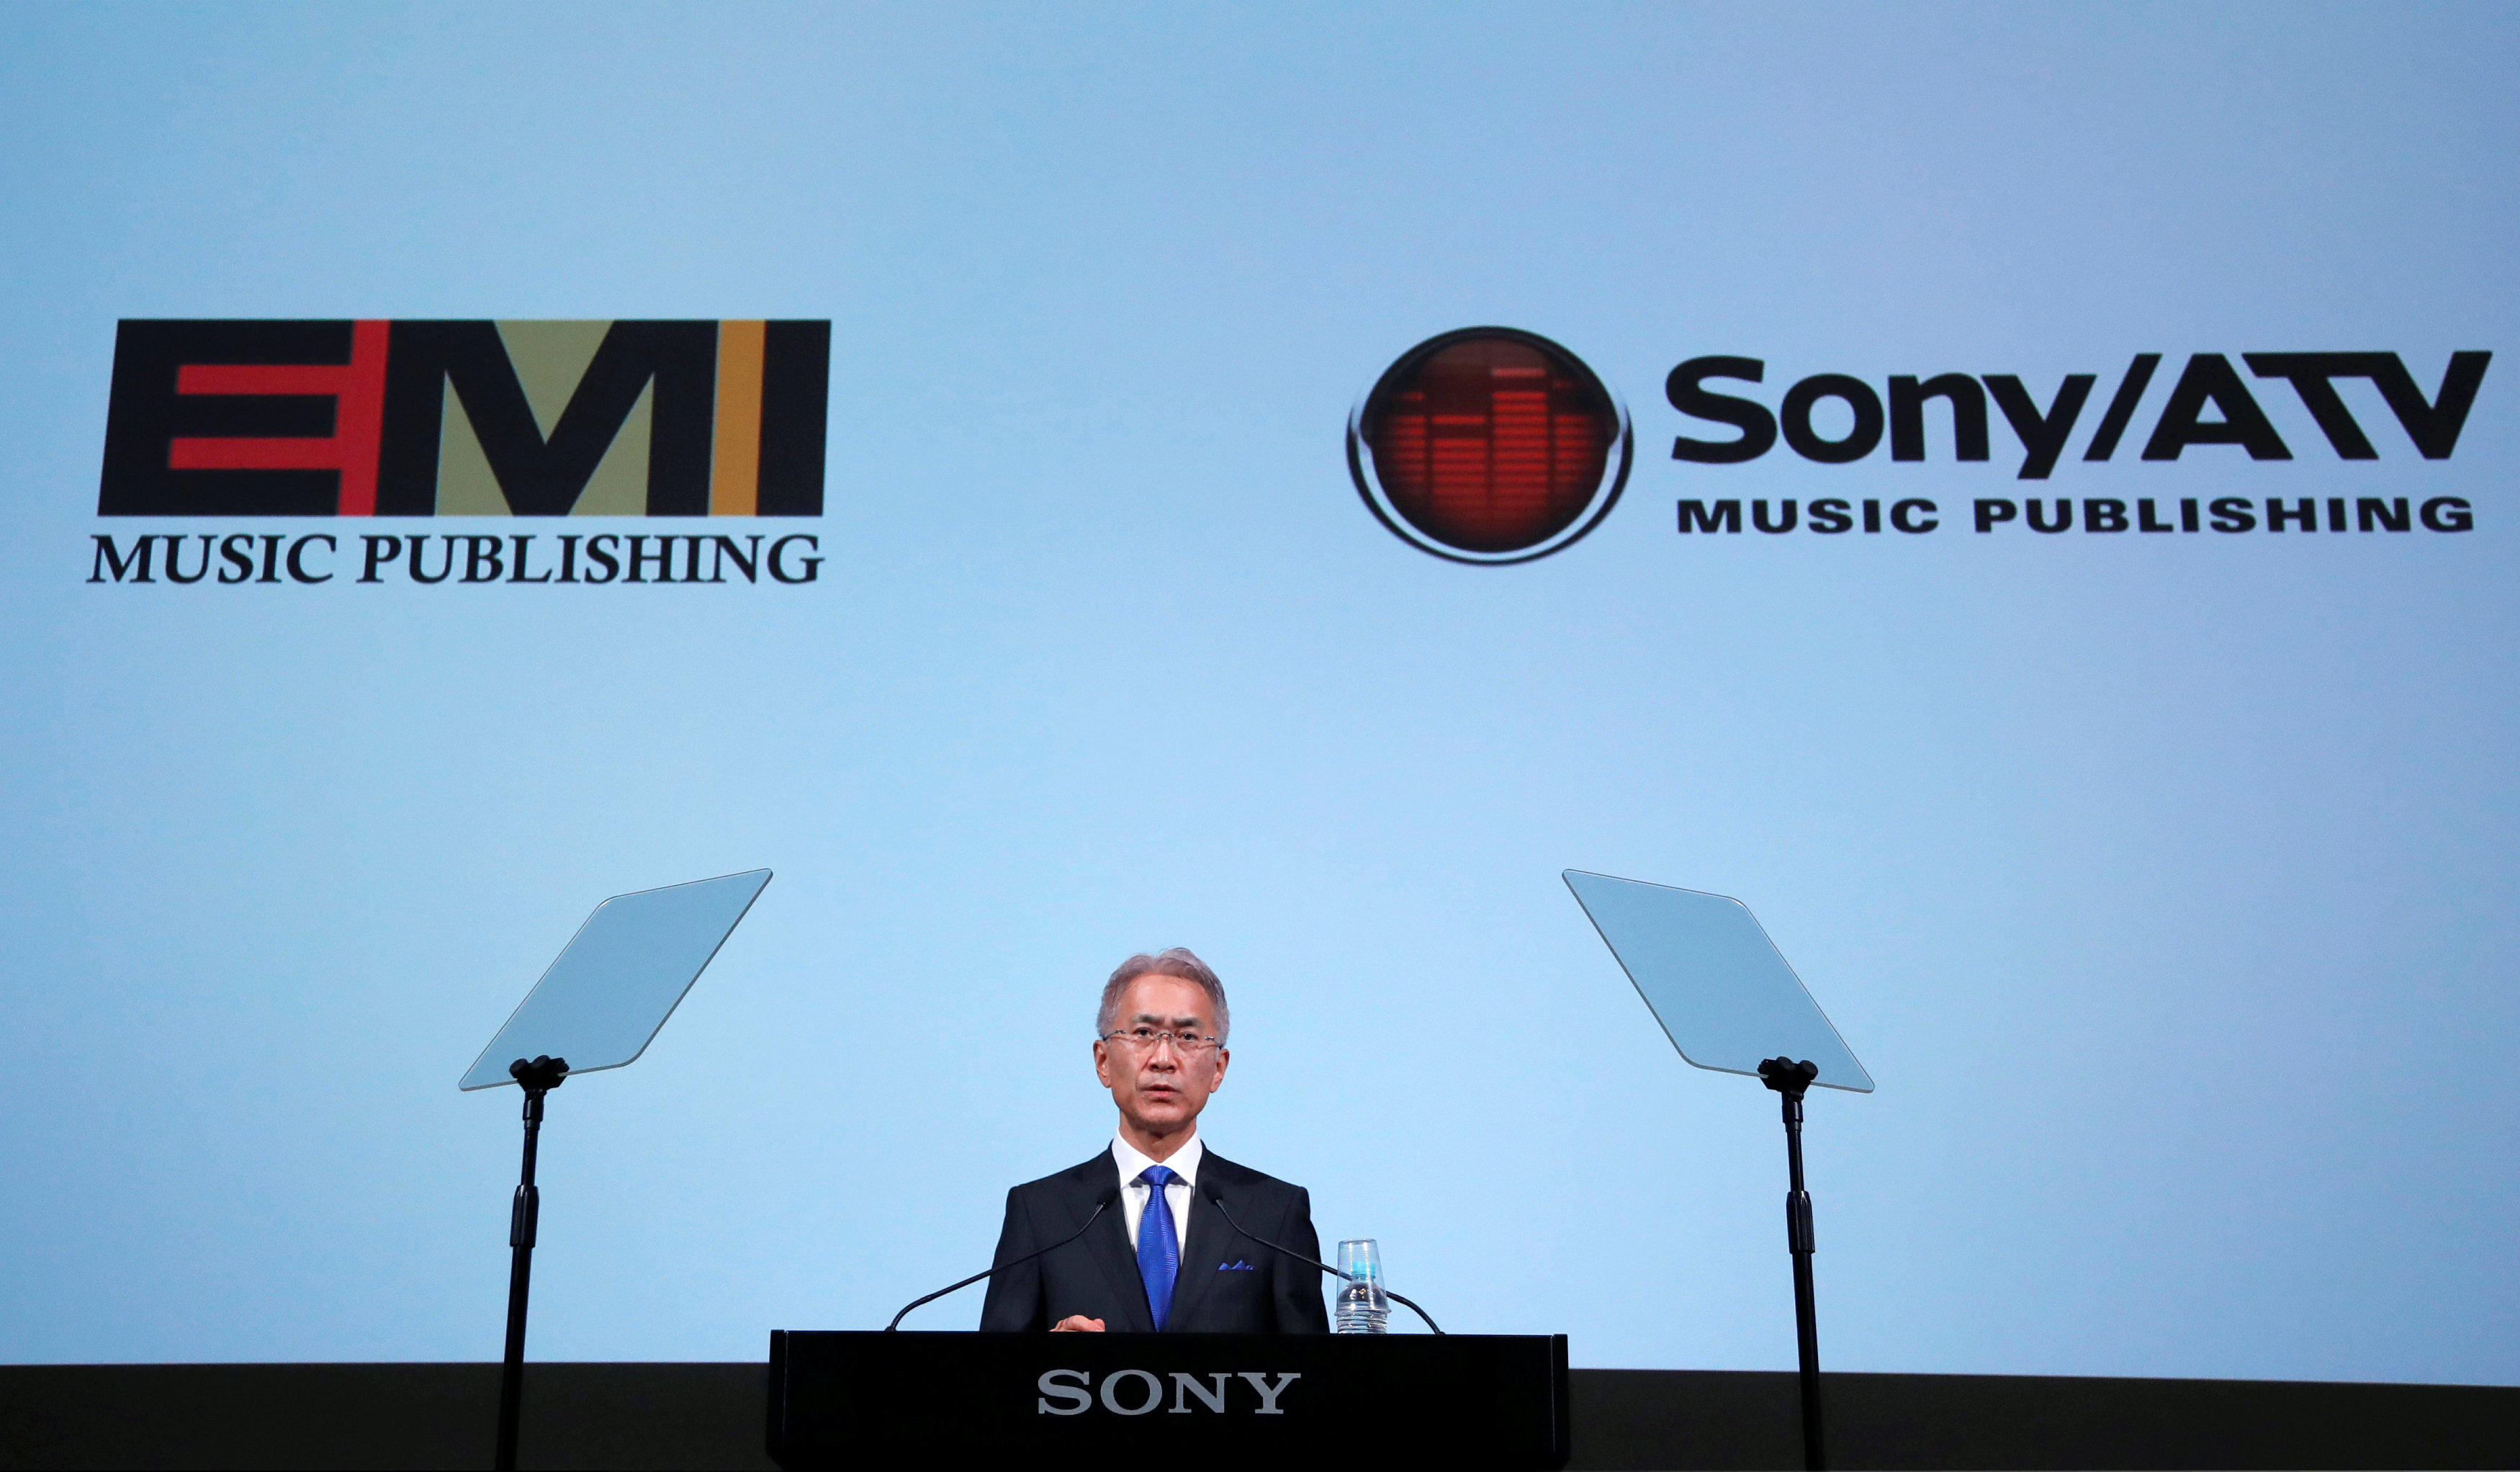 Despite protests Europe just approved Sony’s full EMI acquisition